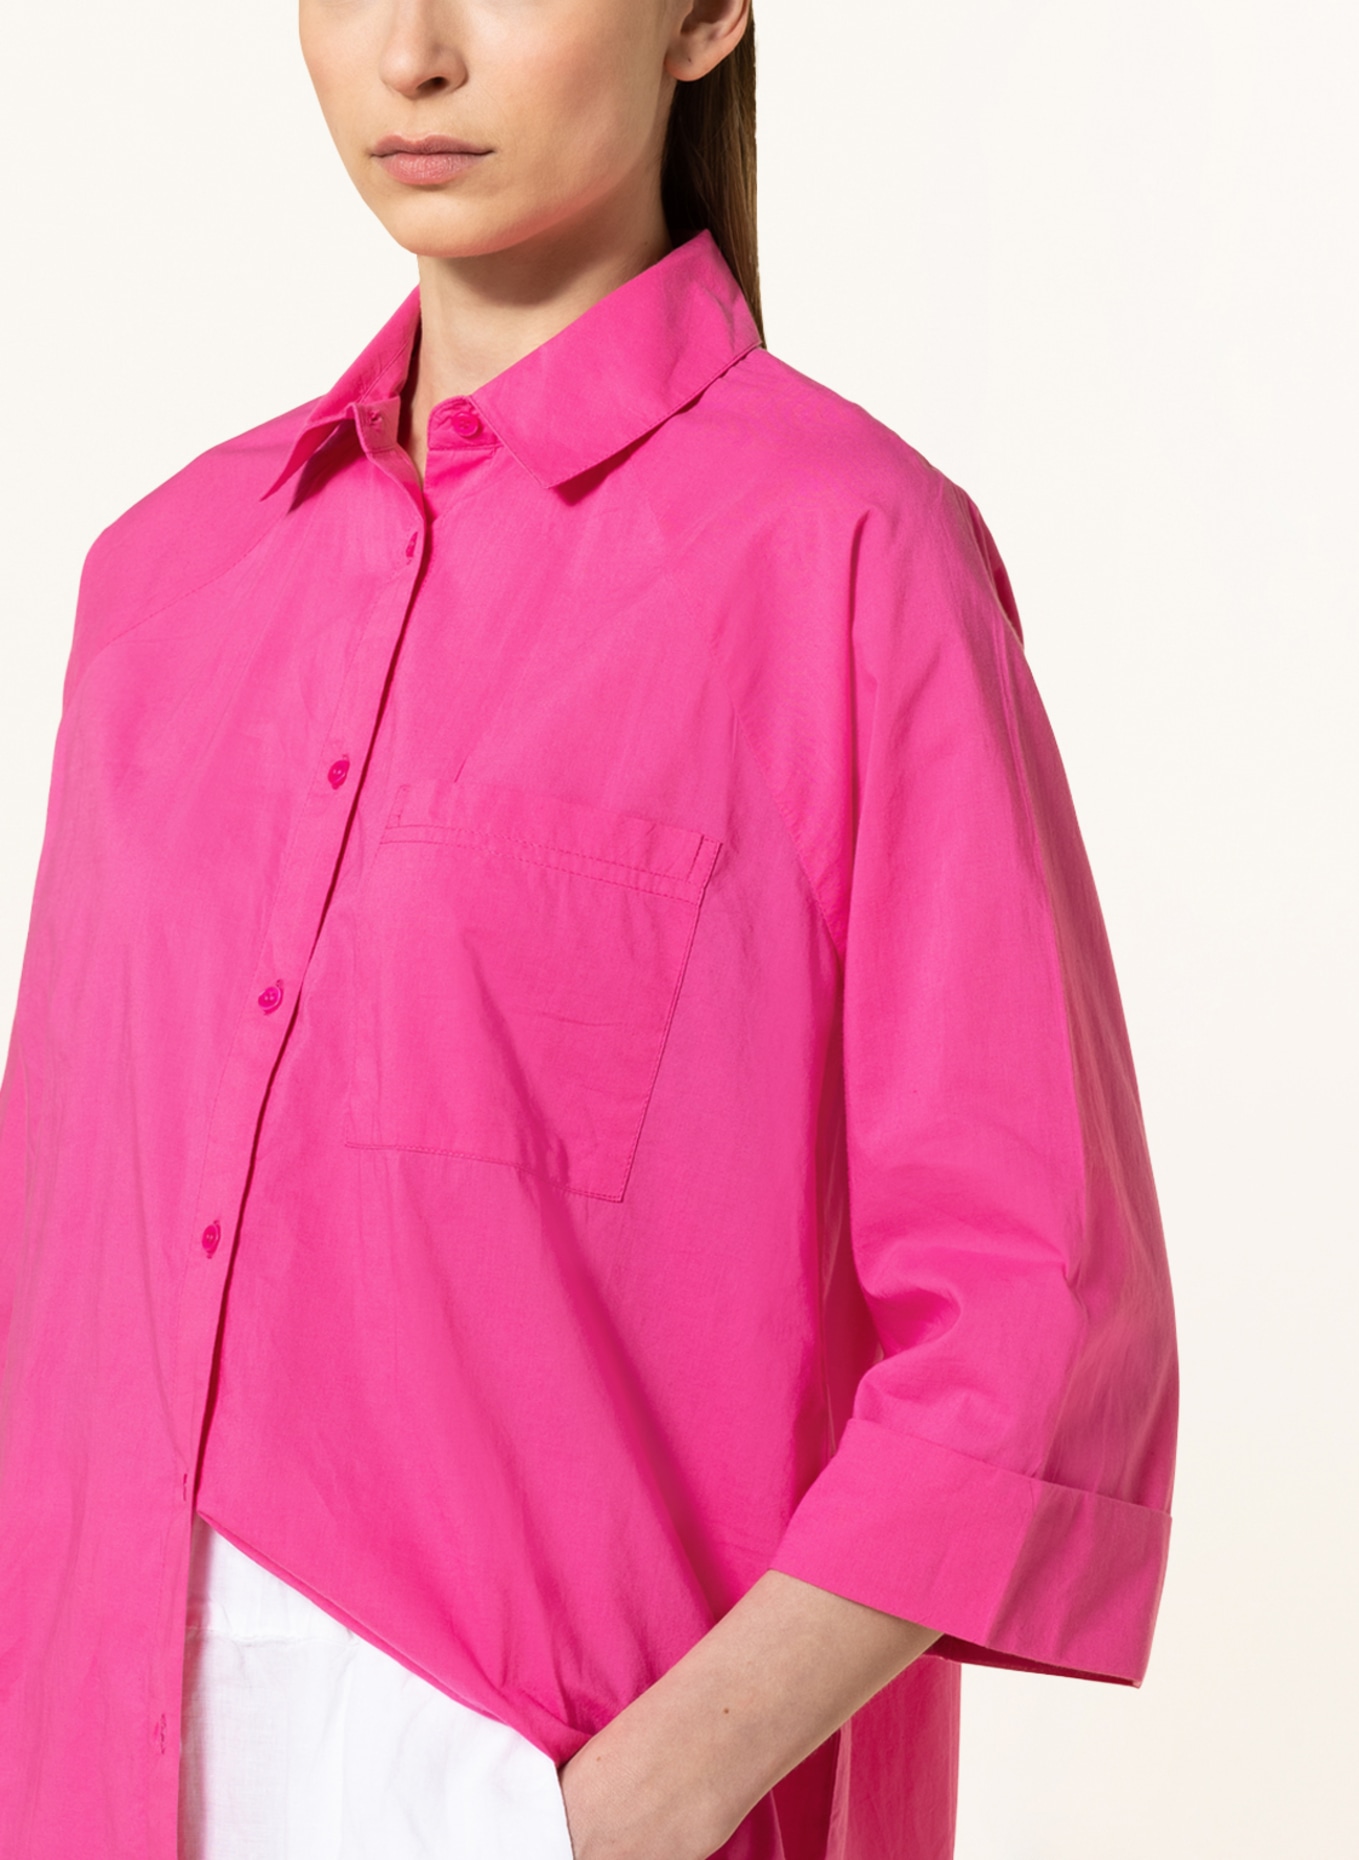 Hot Stuff Shirt blouse with 3/4 sleeves, Color: PINK (Image 4)